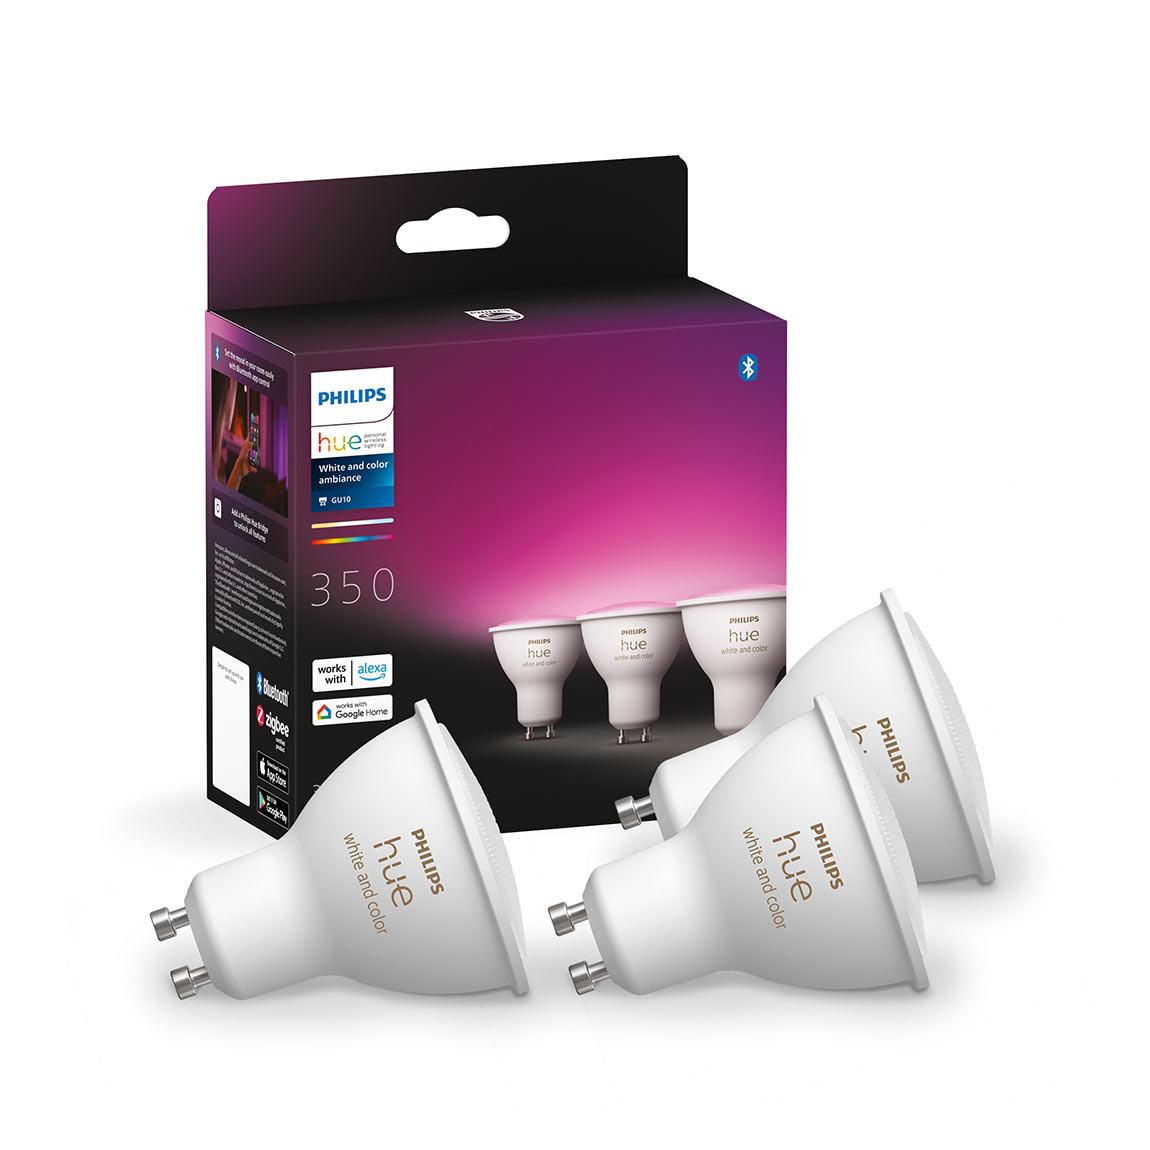 Philips Hue White & Color Ambiance GU10 Bluetooth Starter Kit mit 4 Lampen_Verpackung